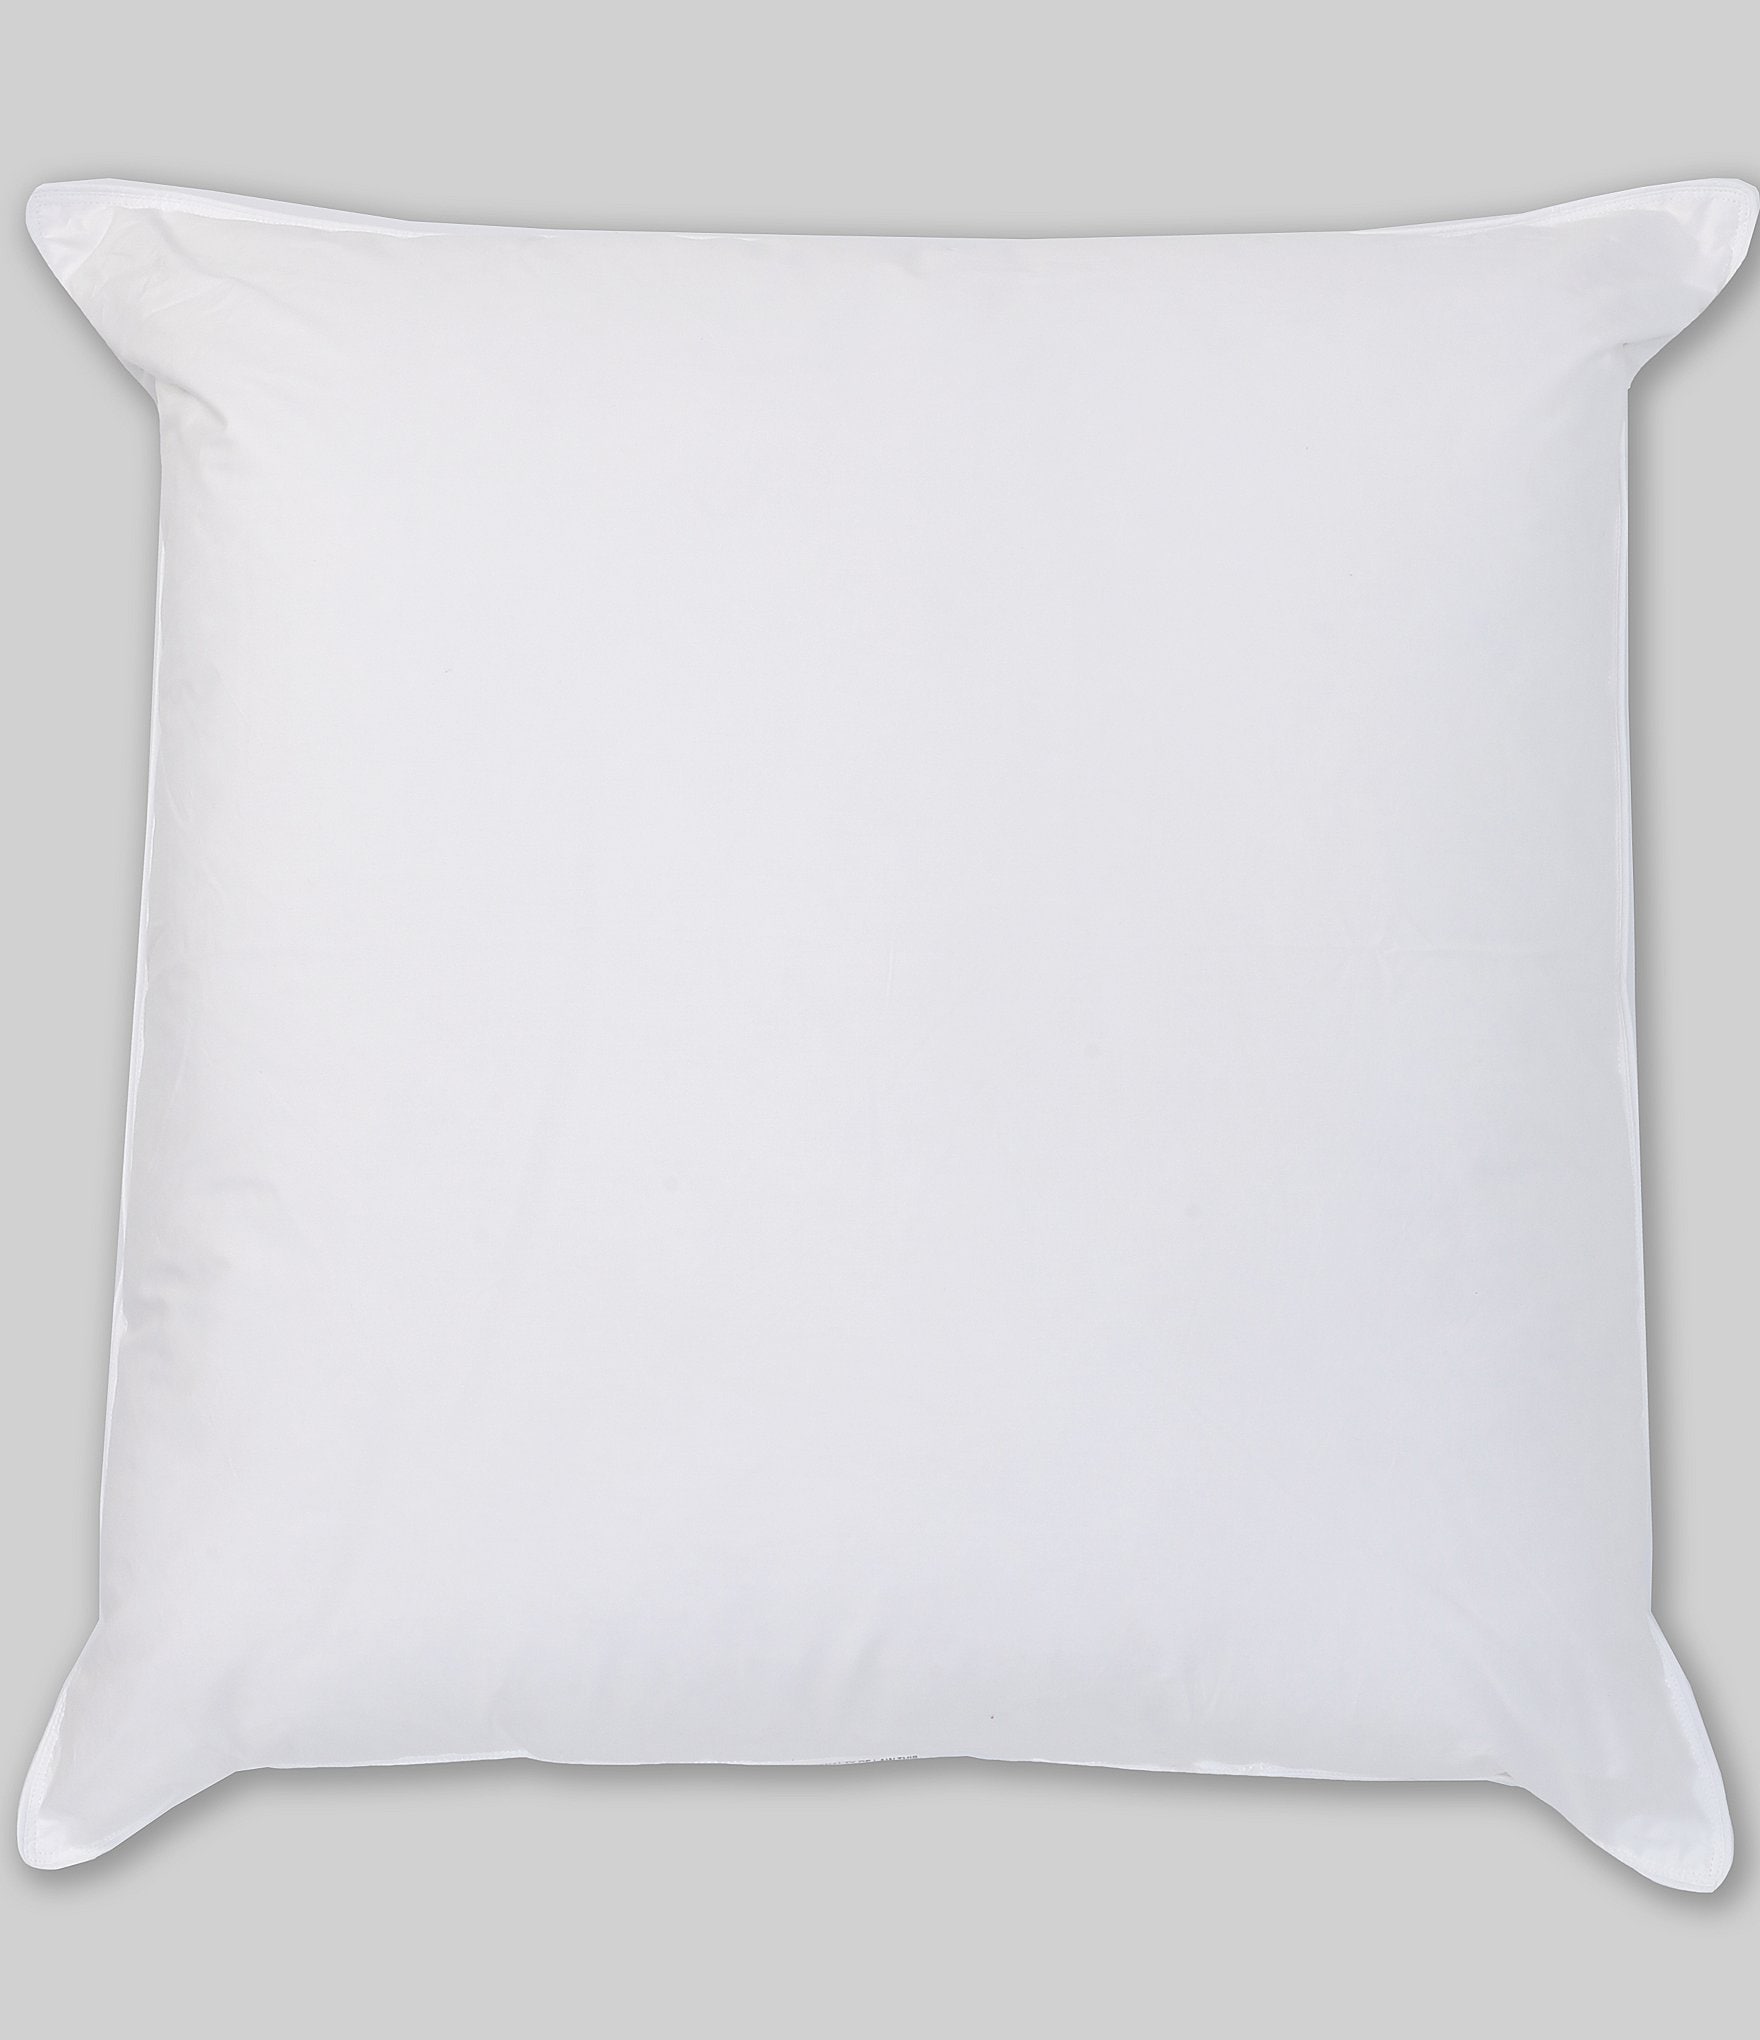 https://dimg.dillards.com/is/image/DillardsZoom/zoom/southern-living-usa-feather--down-euro-pillow/00000000_zi_f985b530-7272-4117-a285-0230e9af7733.jpg